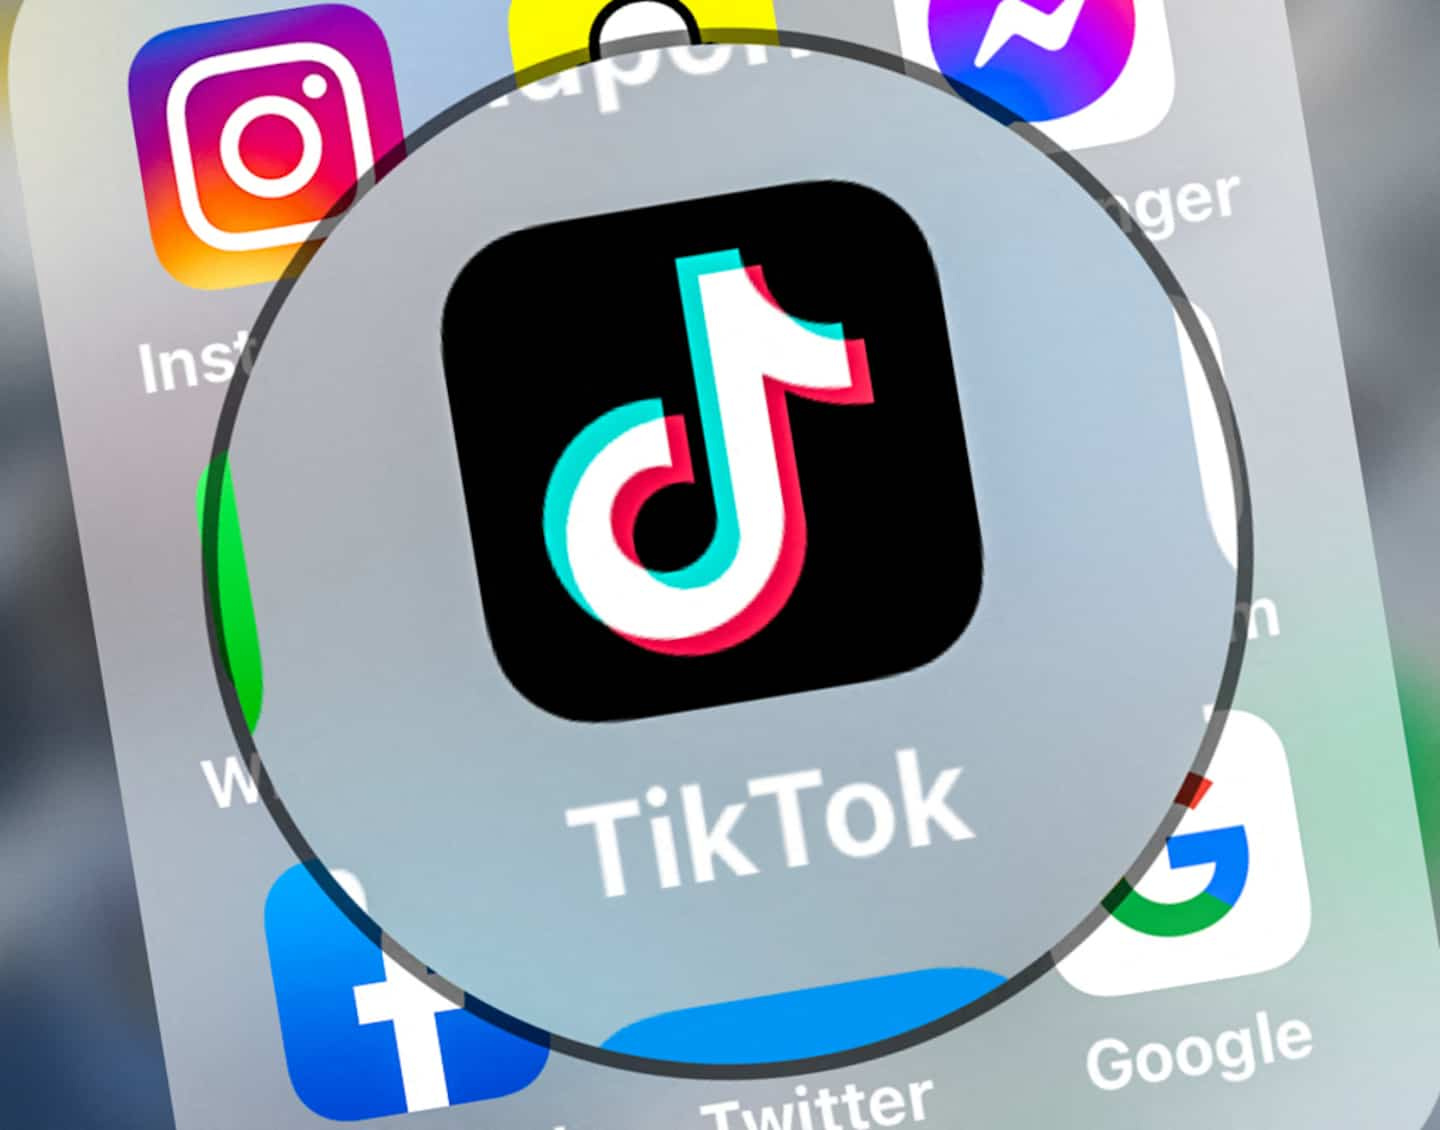 TikTok wants to better filter content accessible to minors